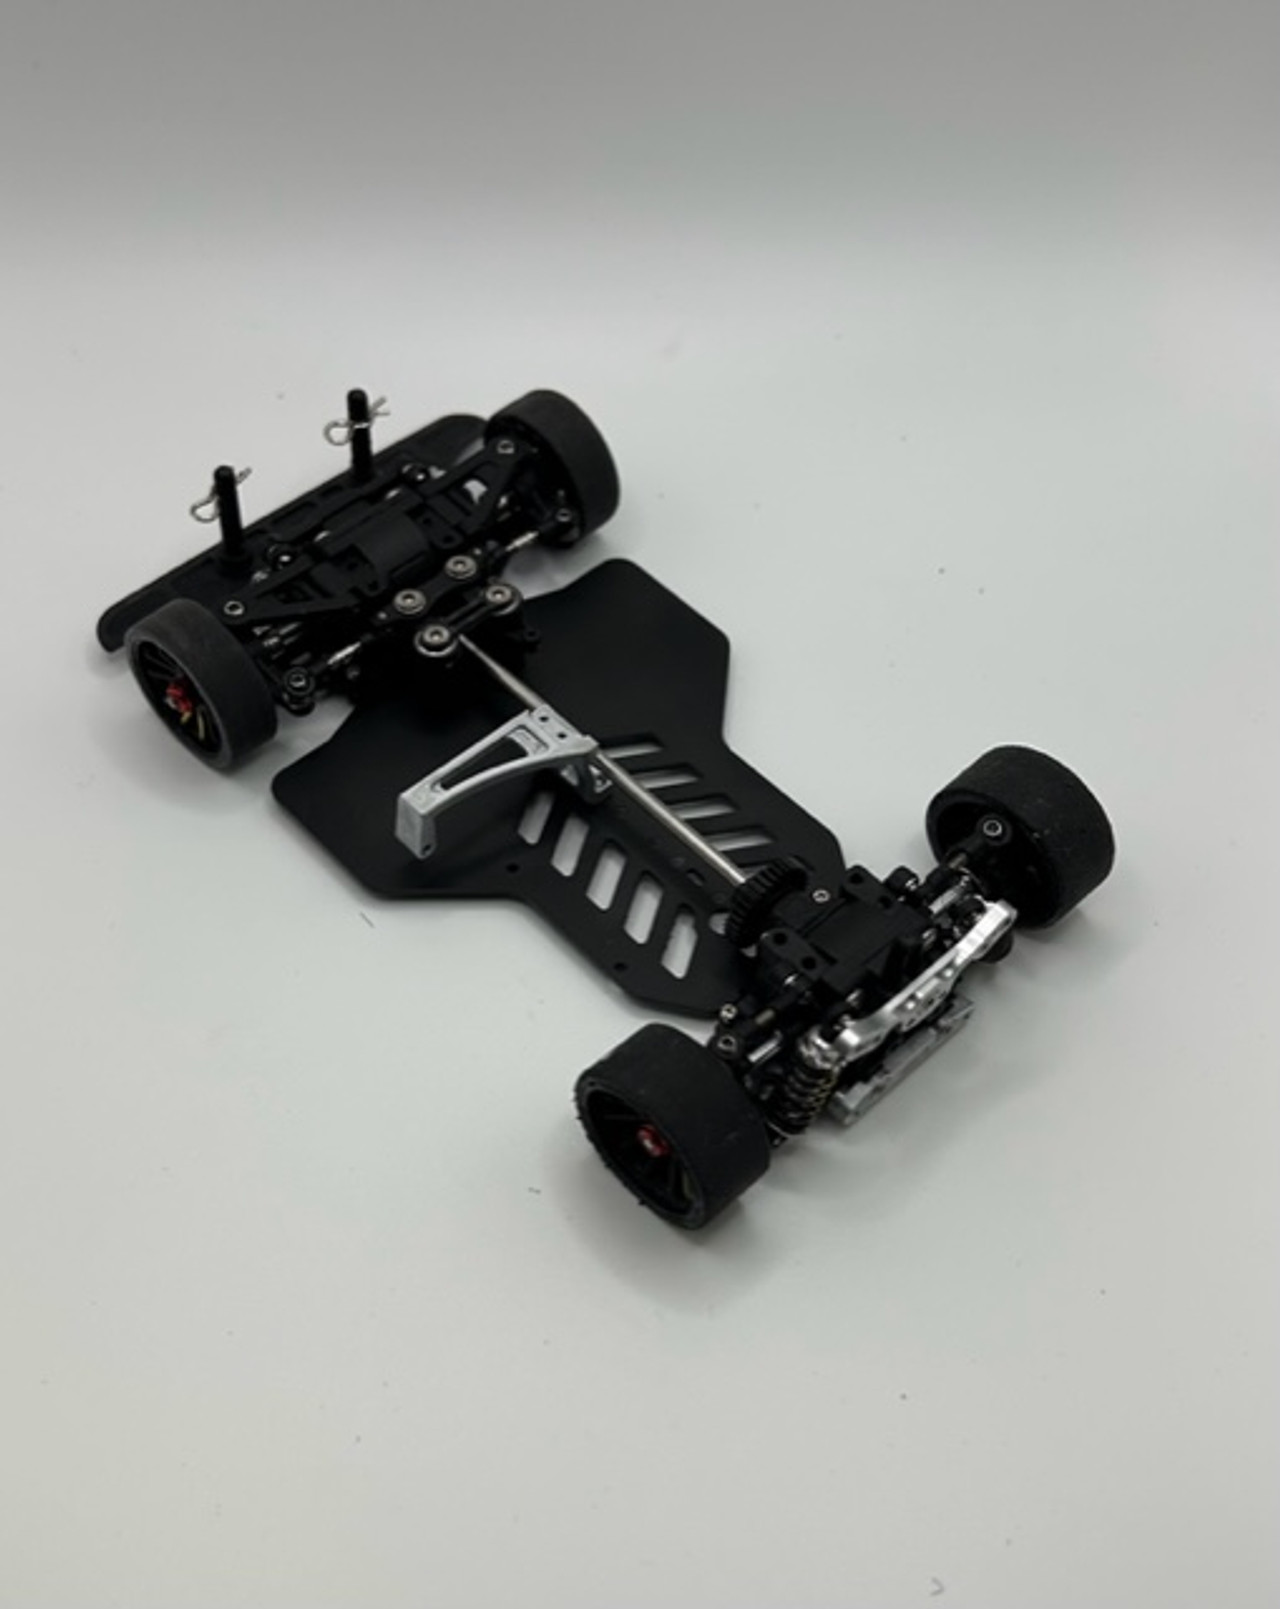 MWX GLA Giulia Pro Racing Chassis with Carbon Deck